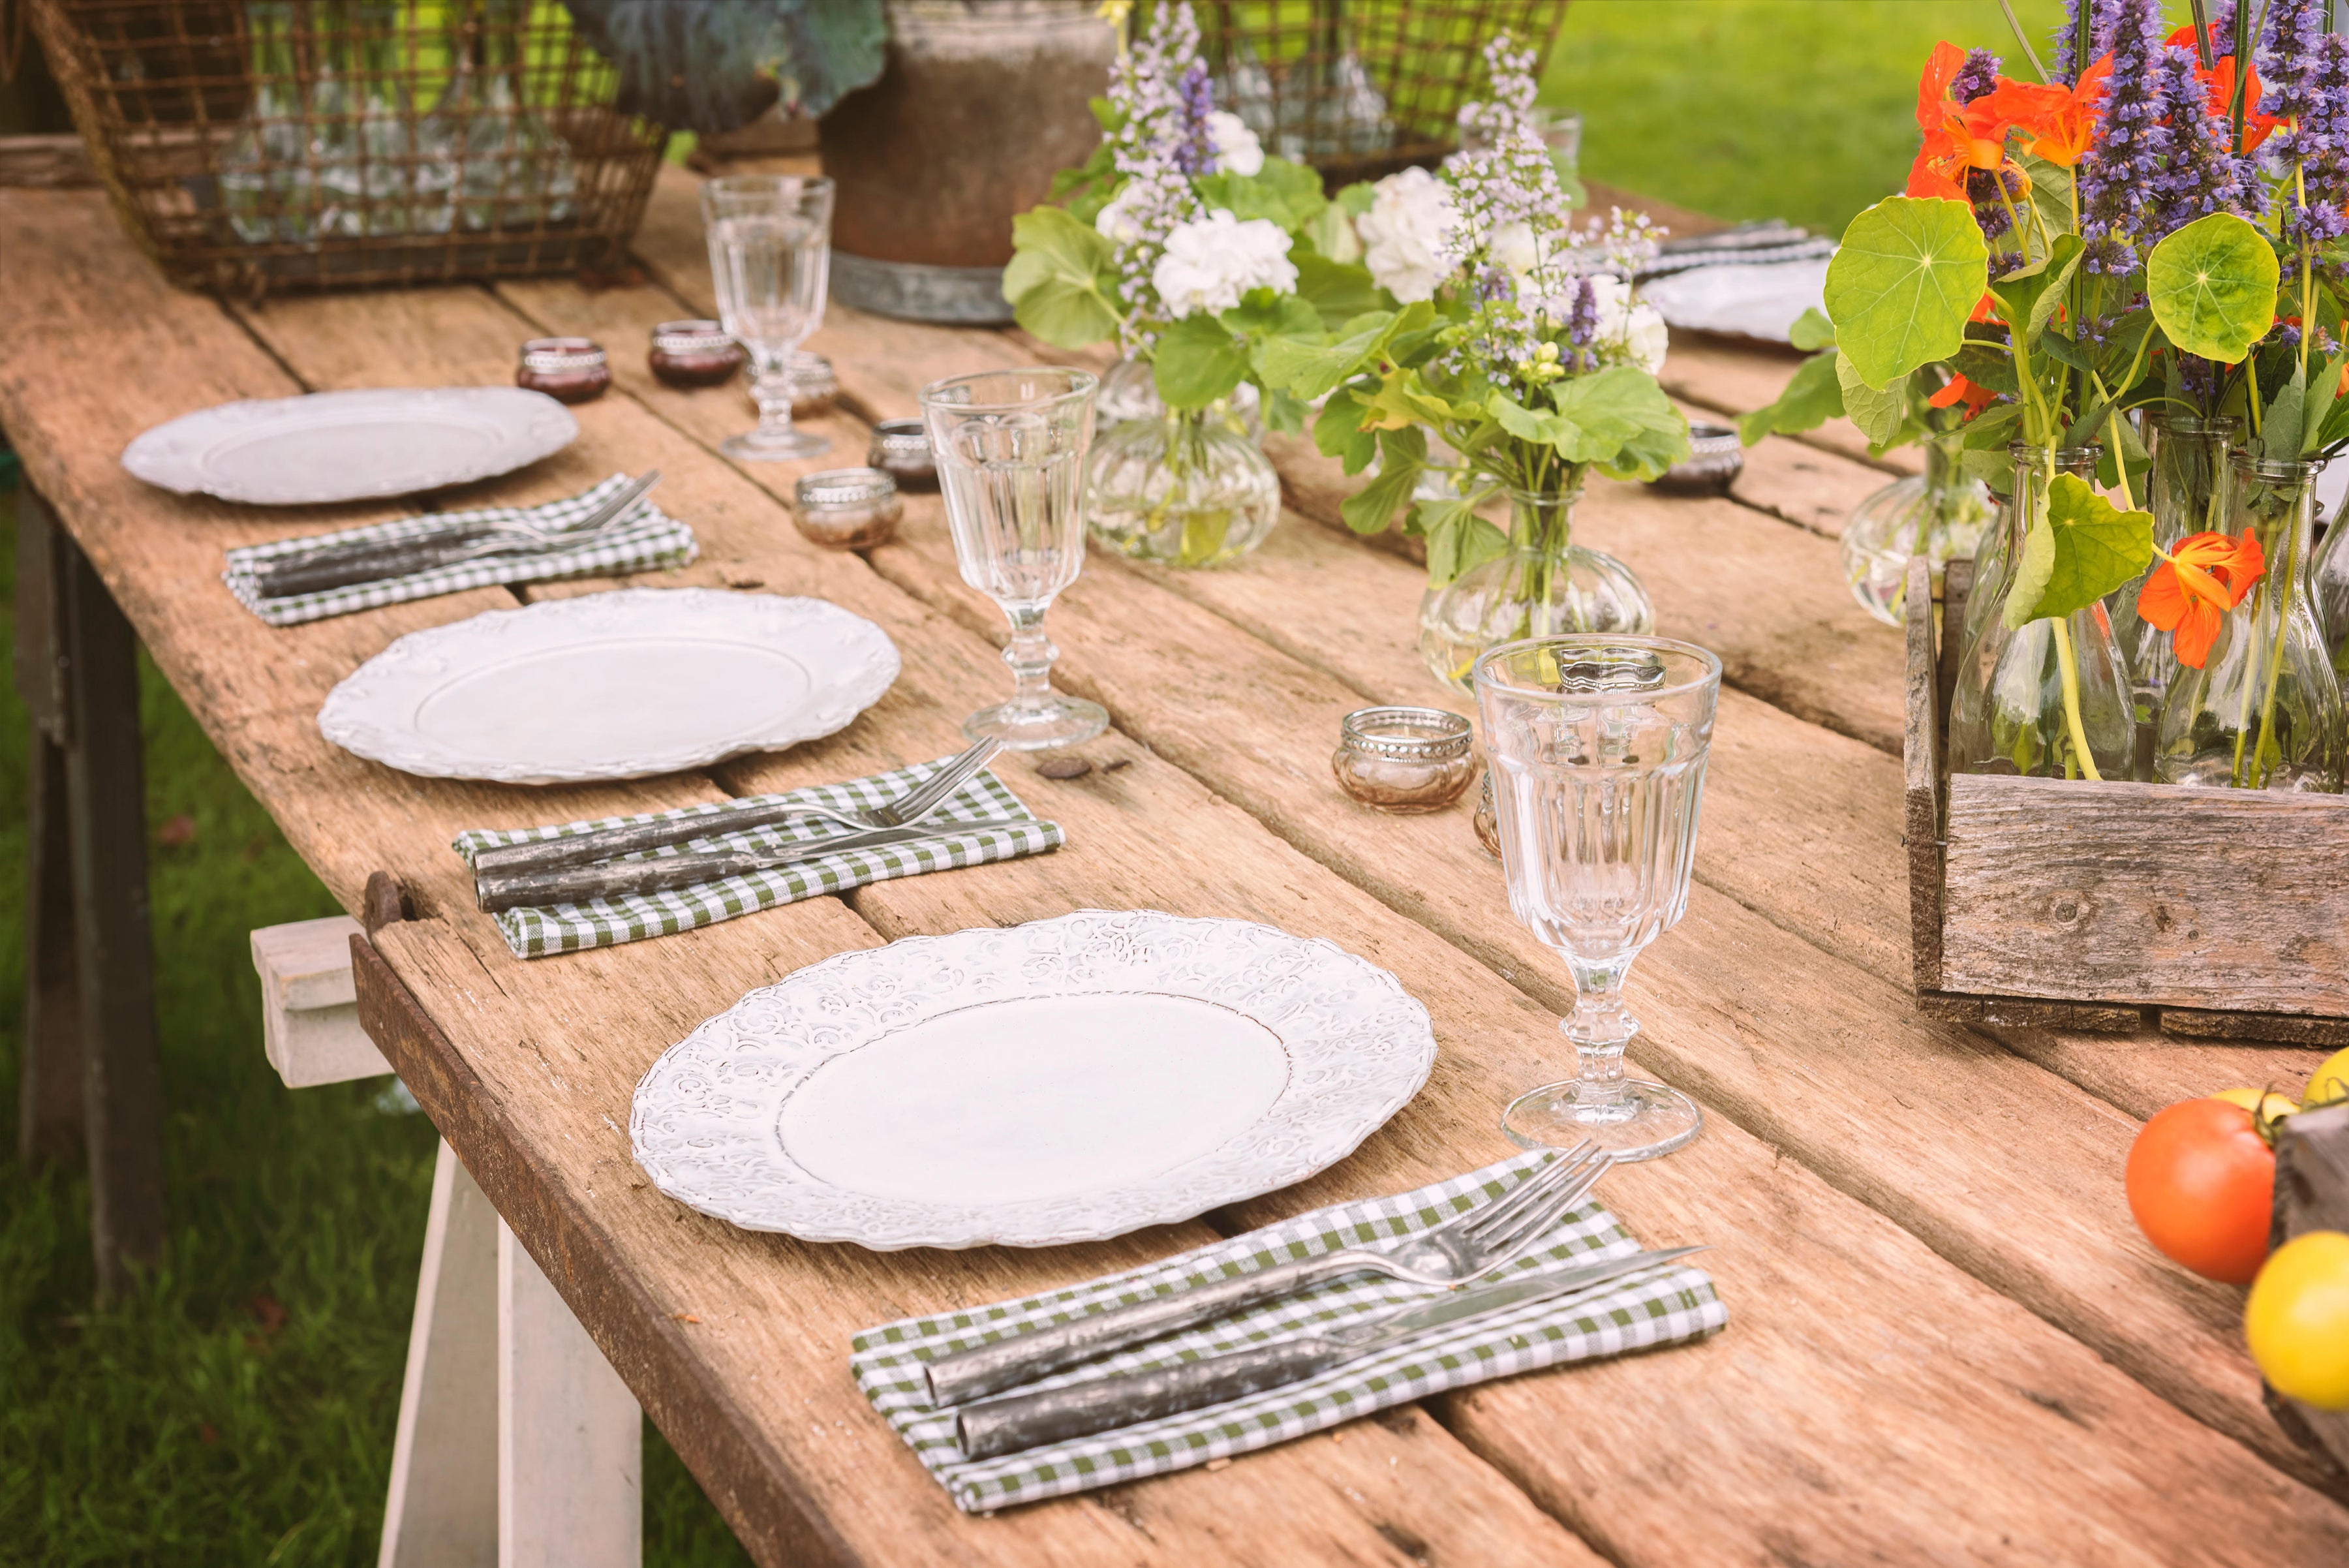 GETTING YOUR GARDEN PARTY-READY